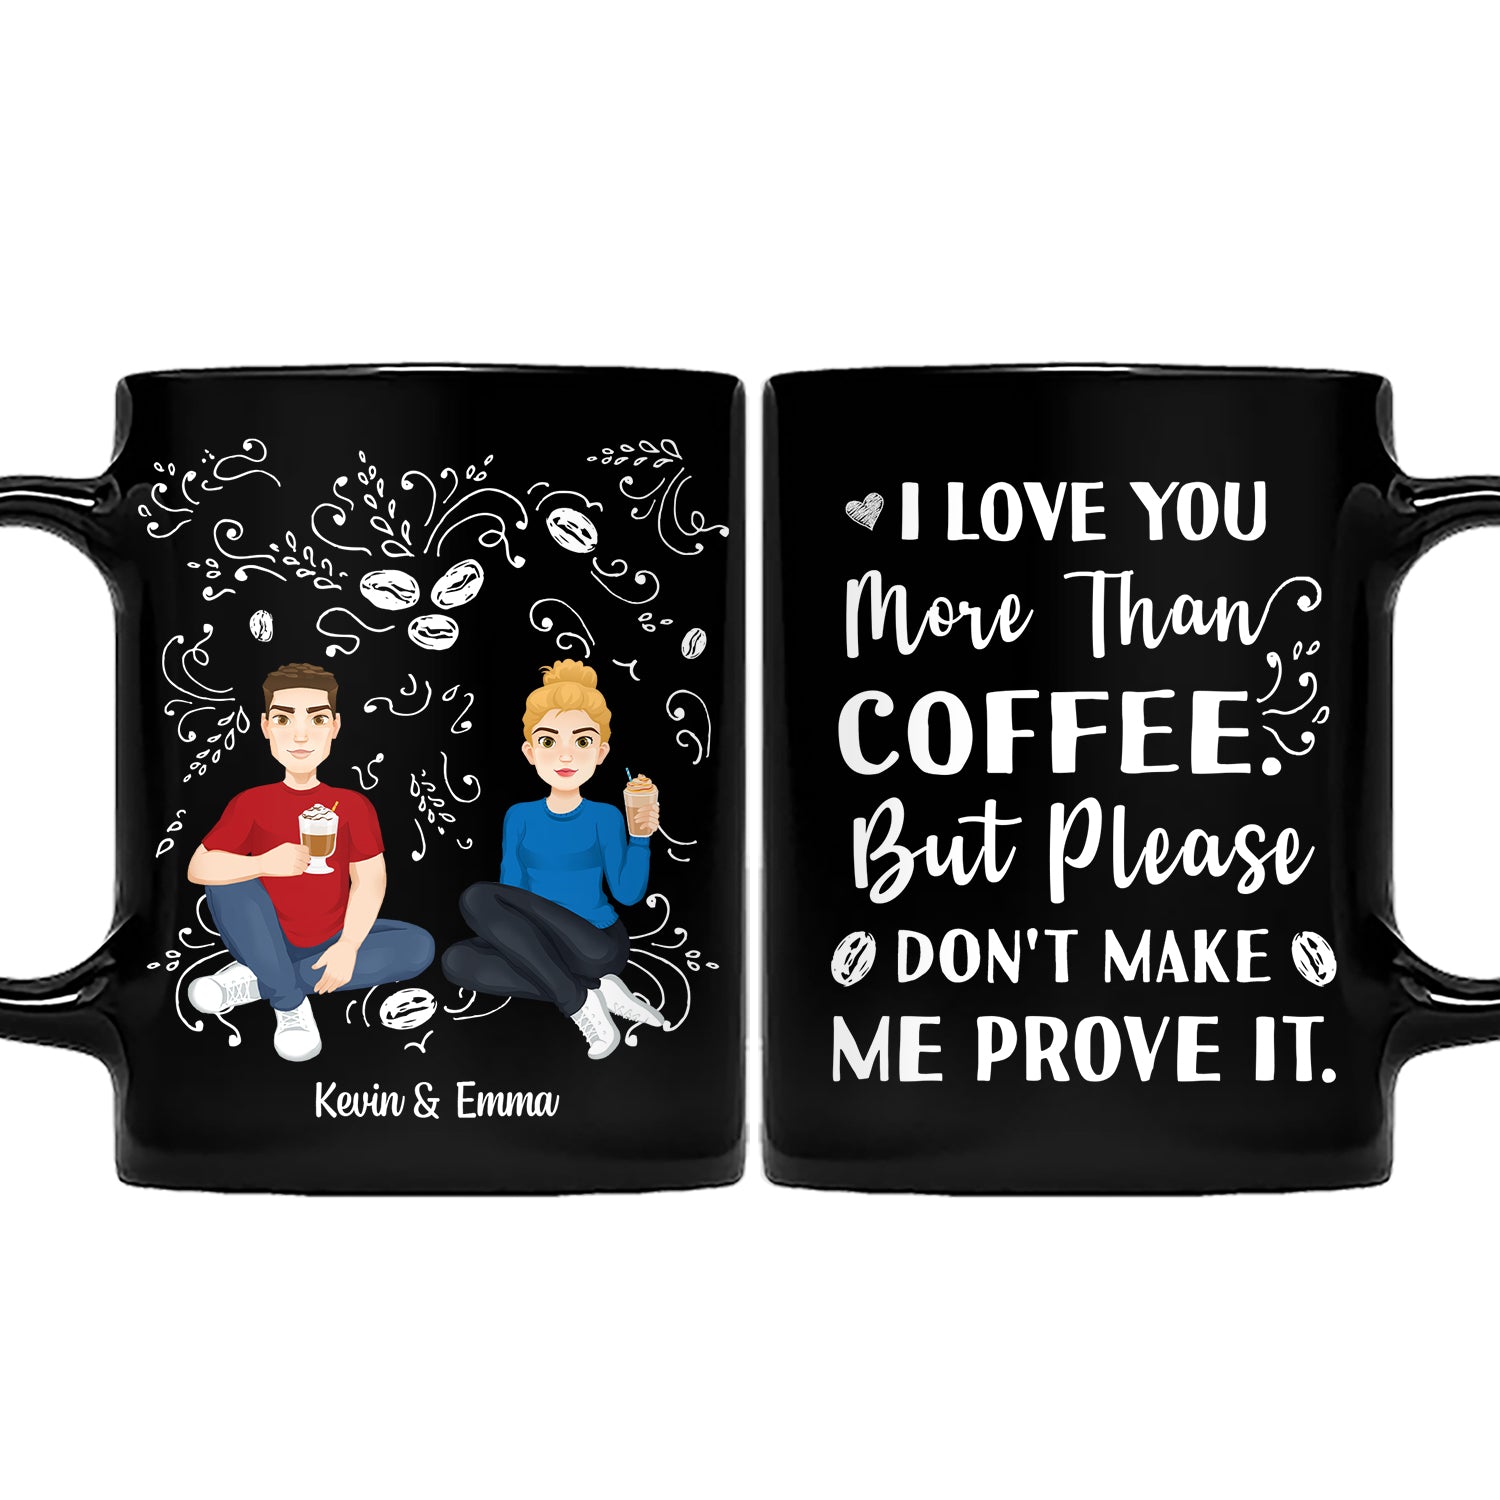 More Than Coffee - Gift For Couples - Personalized Black Mug